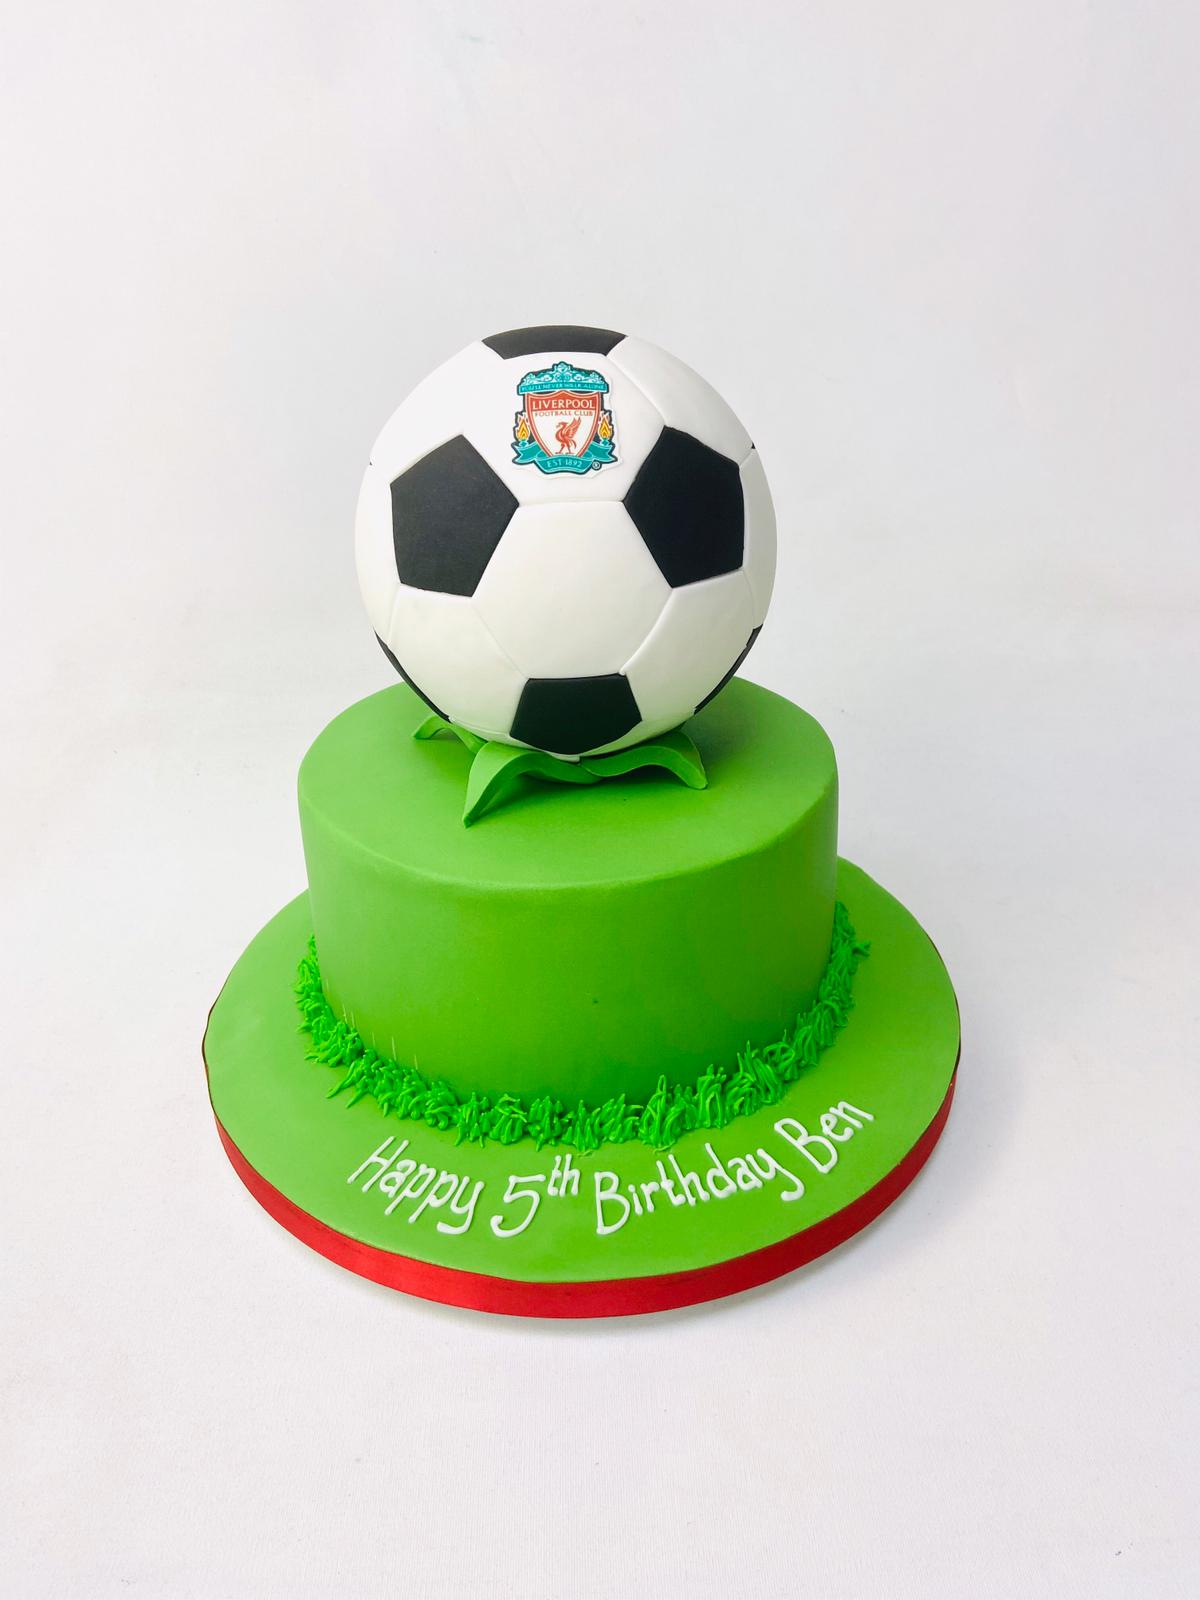 THF06 Soccer Birthday - The Cake Shop | Singapore Cake Delivery